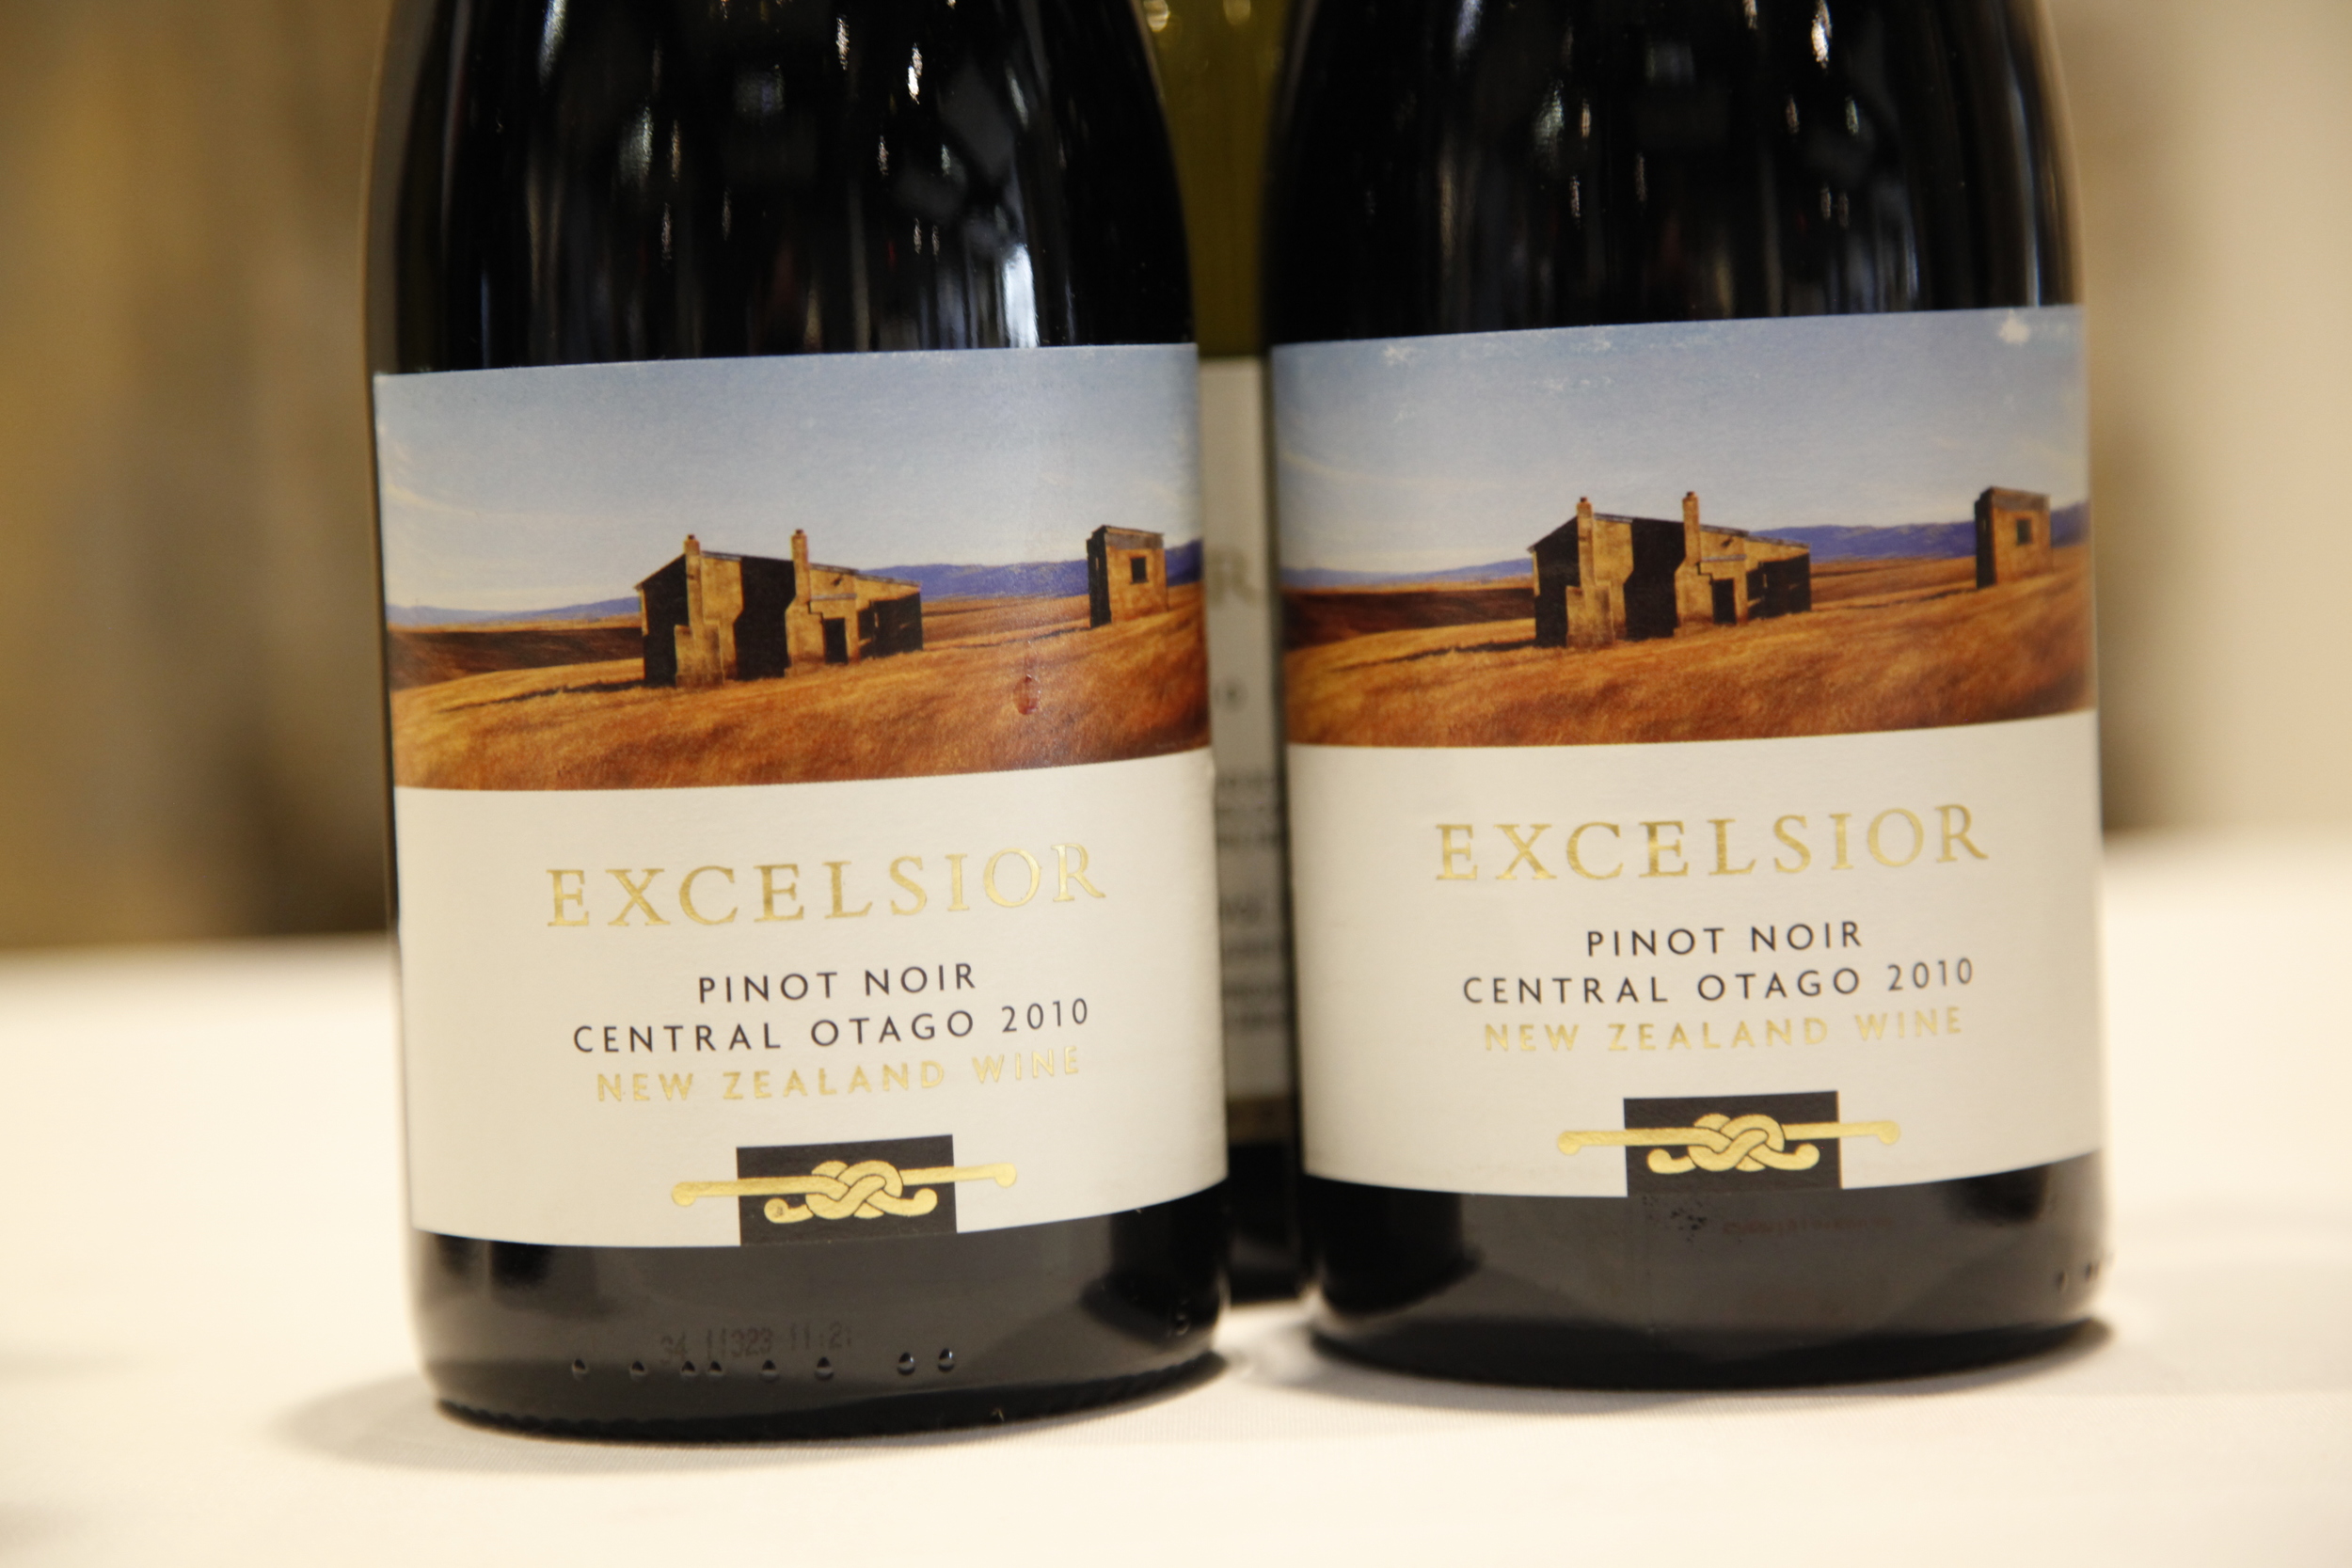  Carrick's top Pinot Noir Cuvee from Central Otago, New Zealand.  